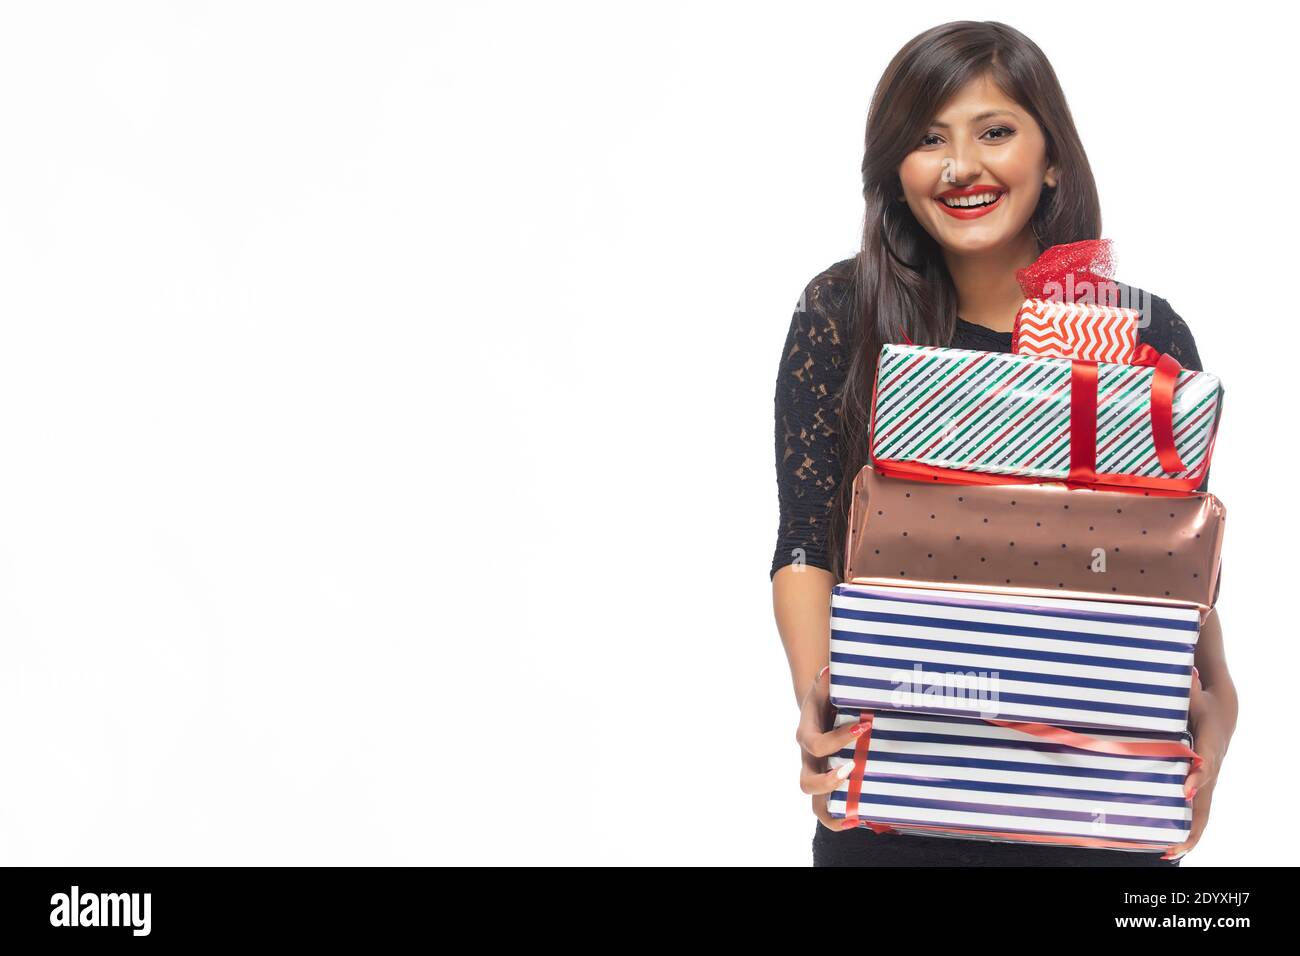 Portrait of young woman holding gift boxes Stock Photo